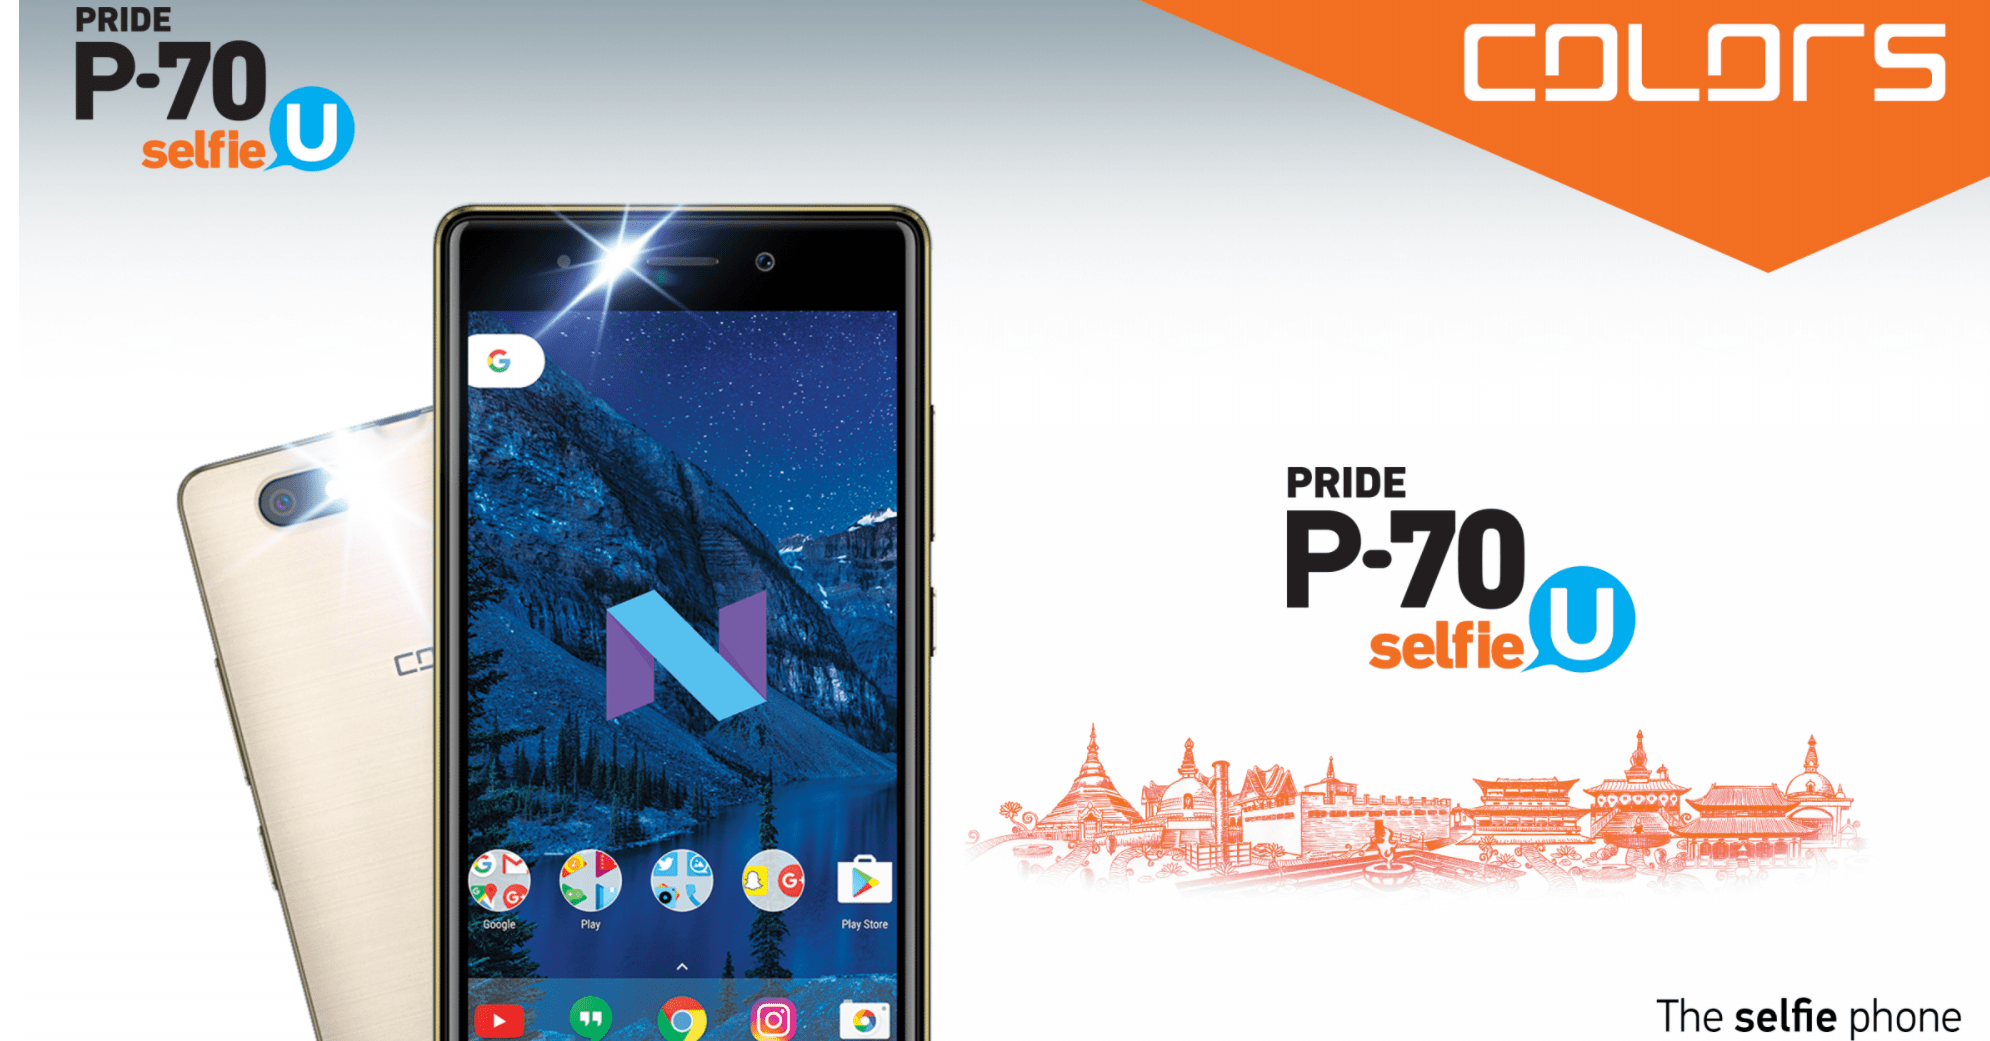 Colors P70 Selfie U launched in Nepal